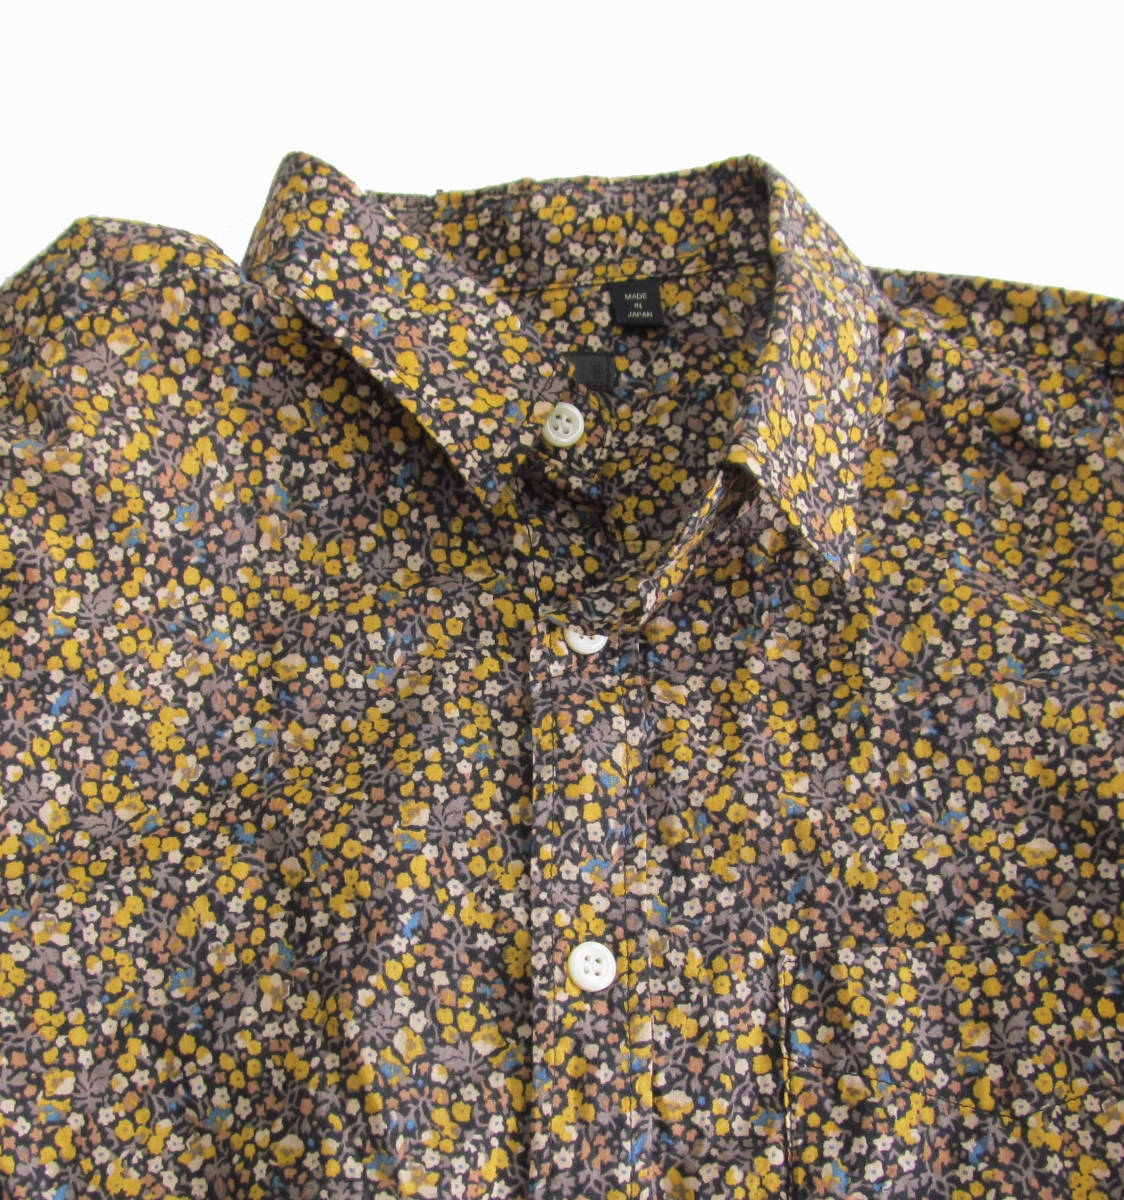  made in Japan HARE Hare pattern shirt floral print half edge sleeve 5 minute sleeve shirt M d4